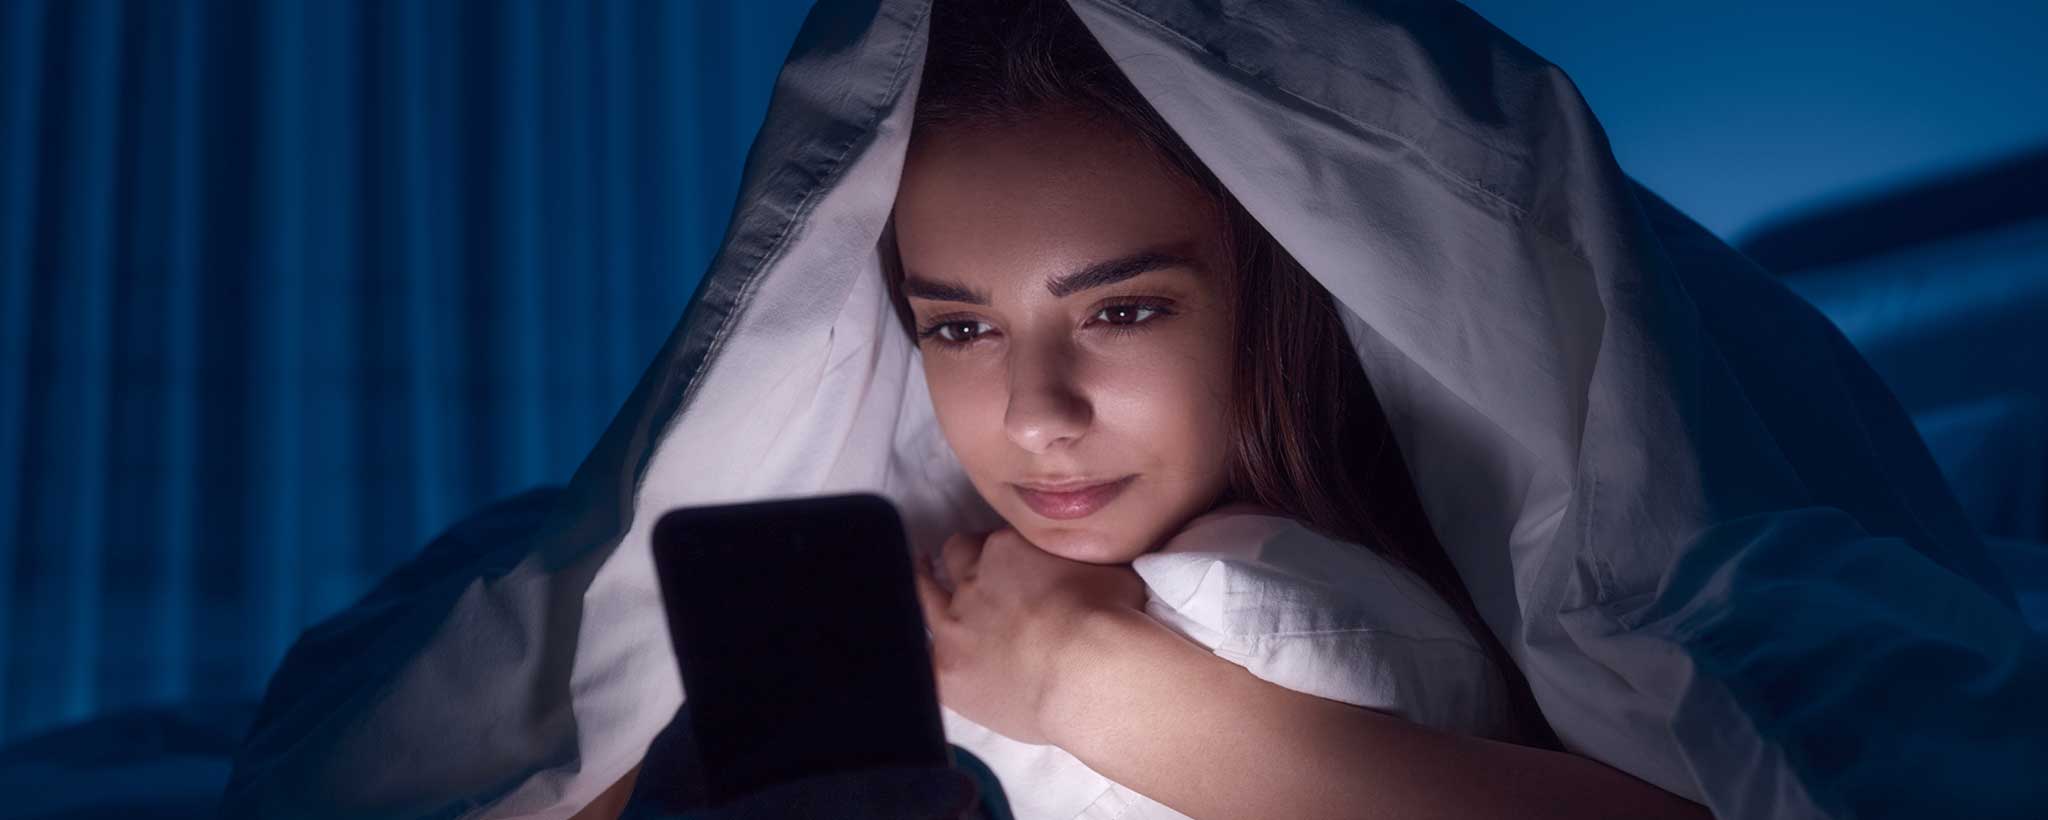 'Female texting beneath bed sheets'